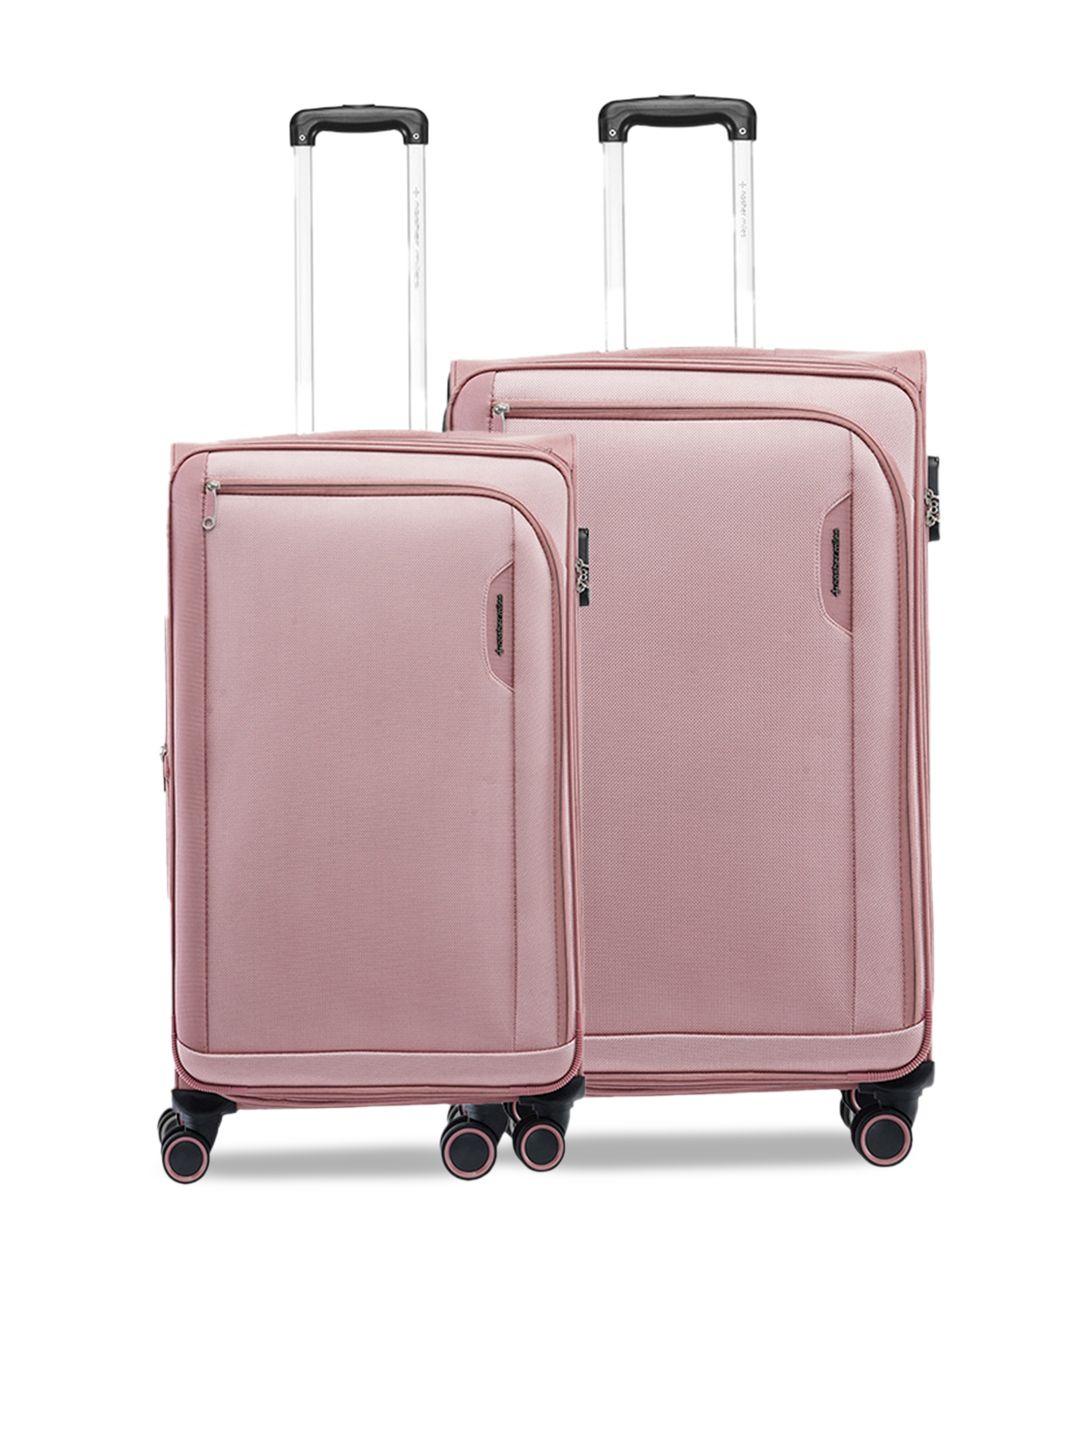 nasher-miles-dallas-expander-set-of-2-pink-soft-sided-travel-trolley-suitcase